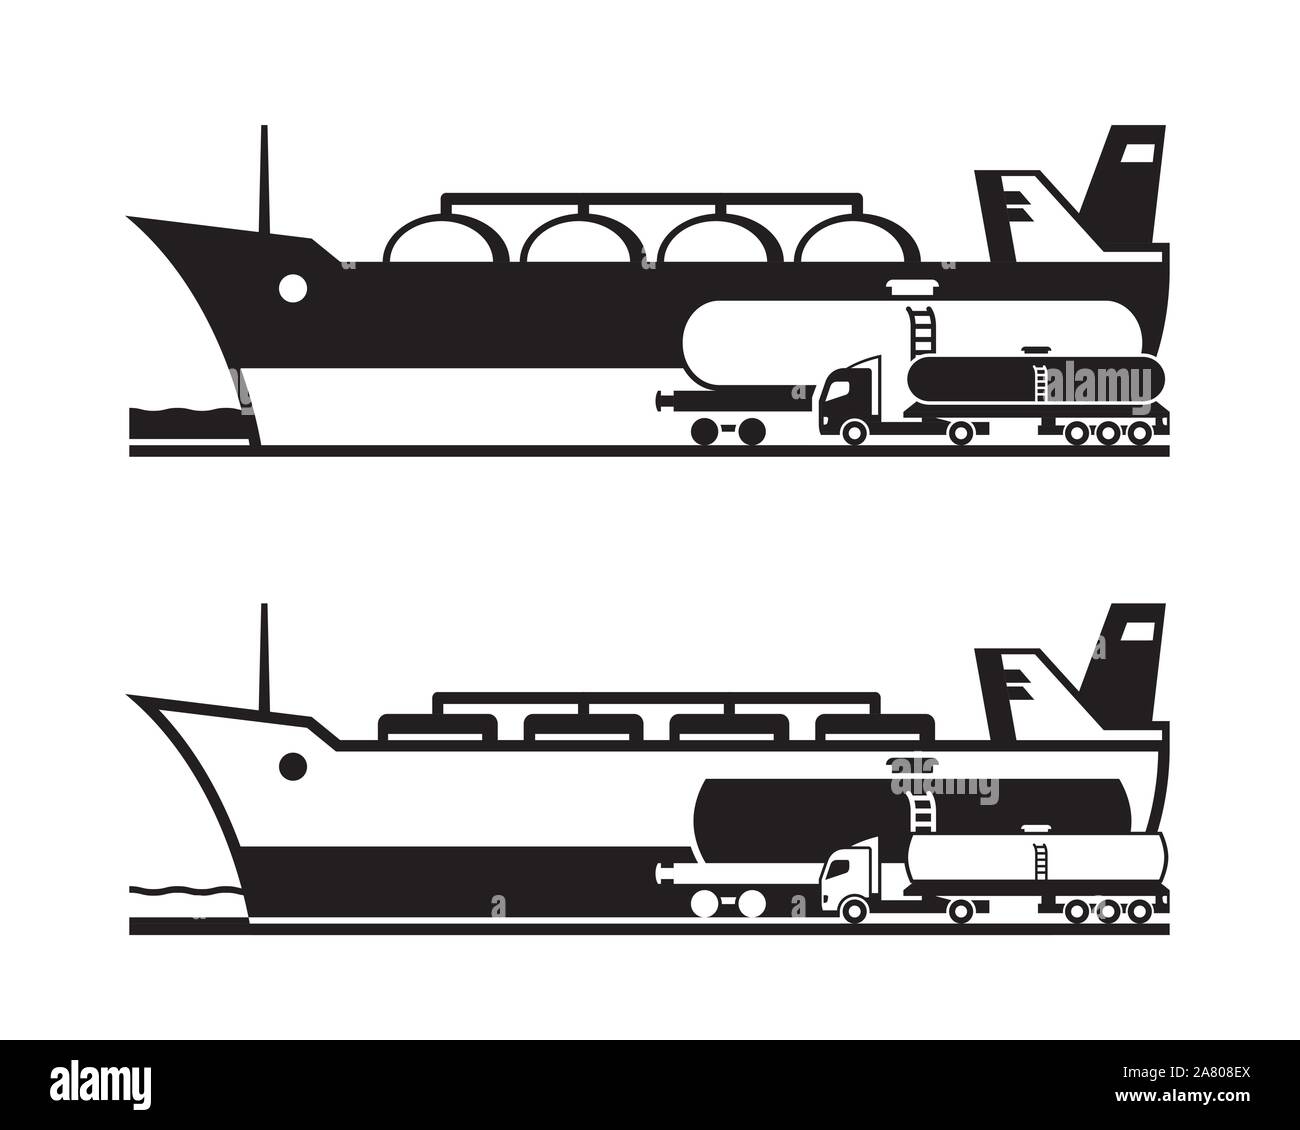 Transportation of oil and gas by land and water - vector illustration Stock Vector